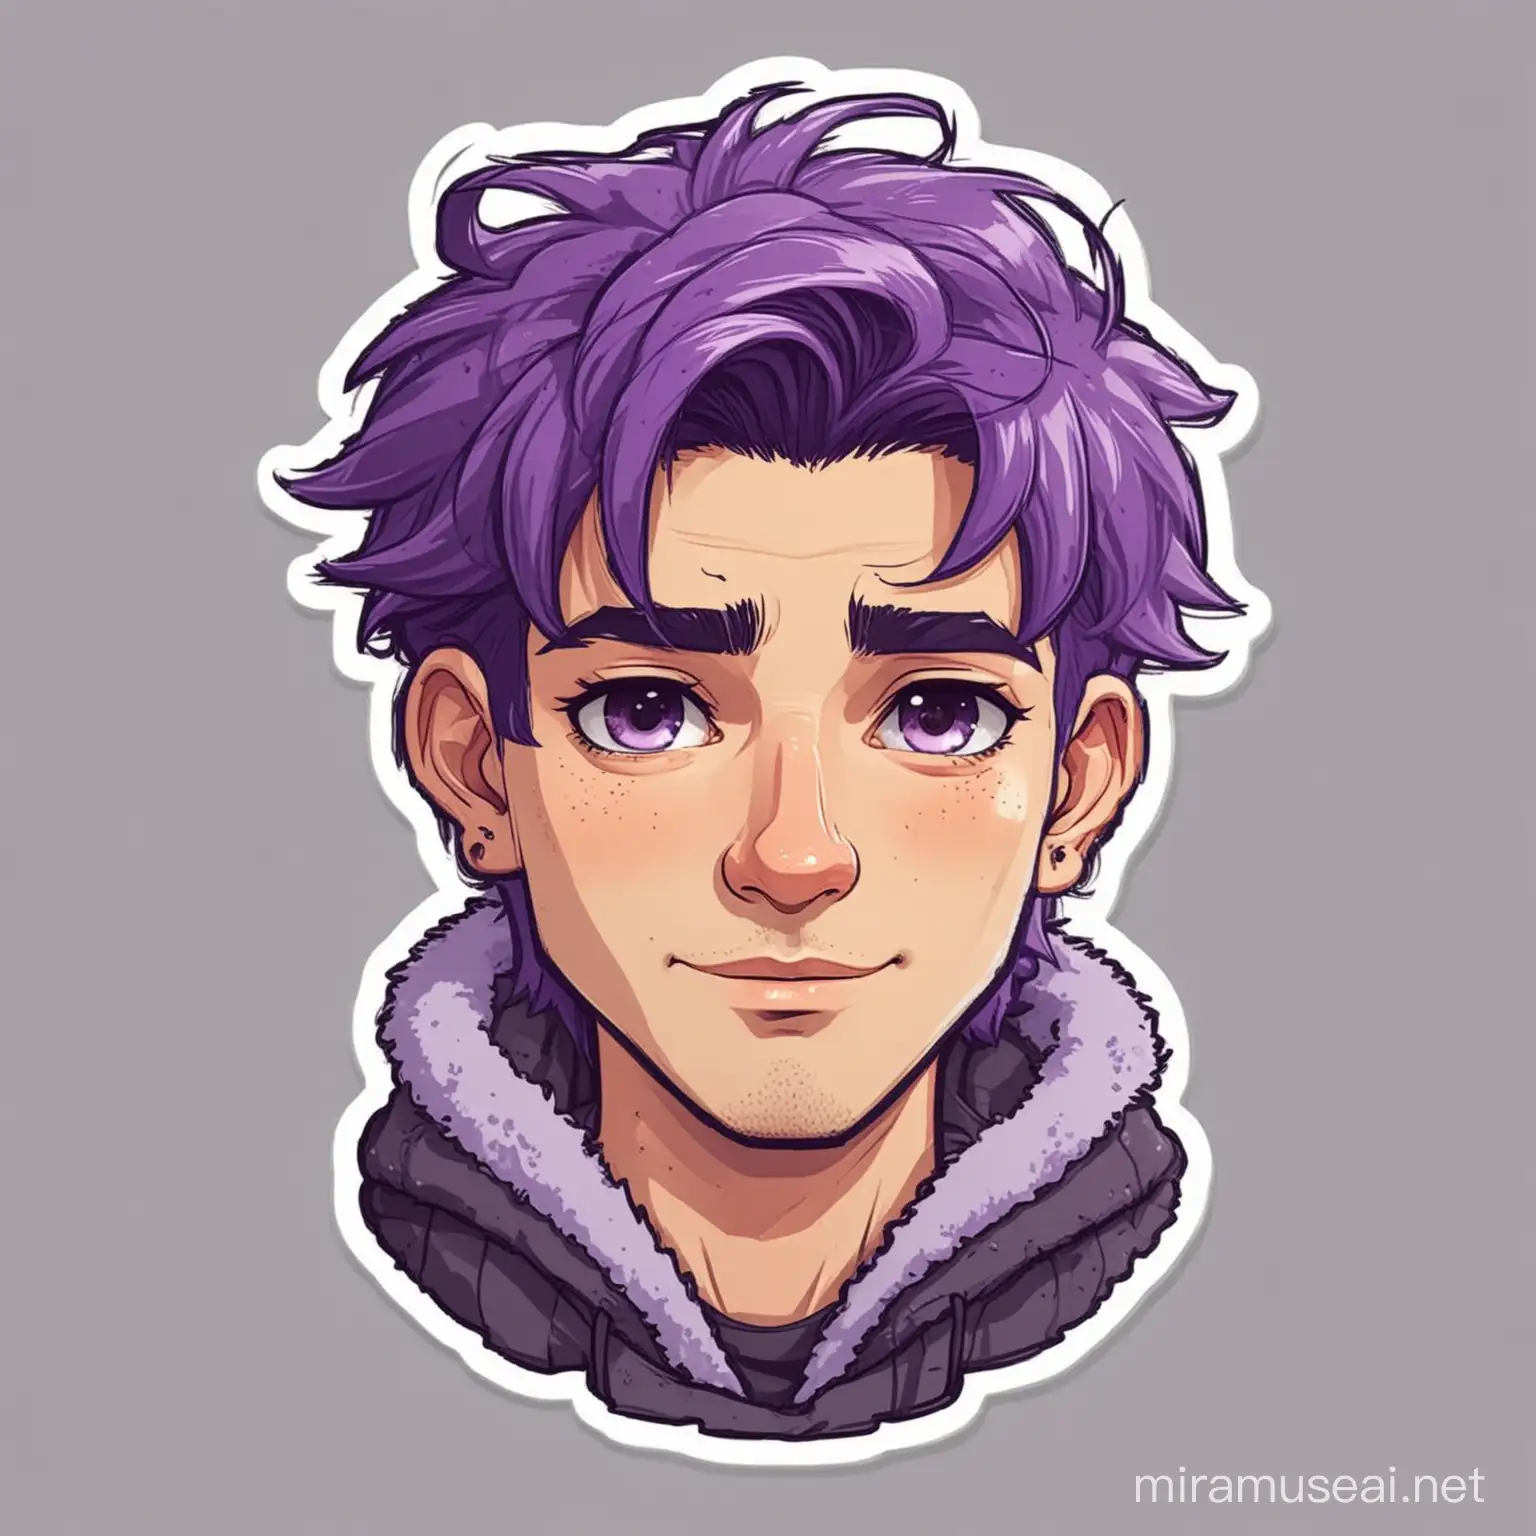 Vibrant Cartoon Man with High Detail and Lavender Locks